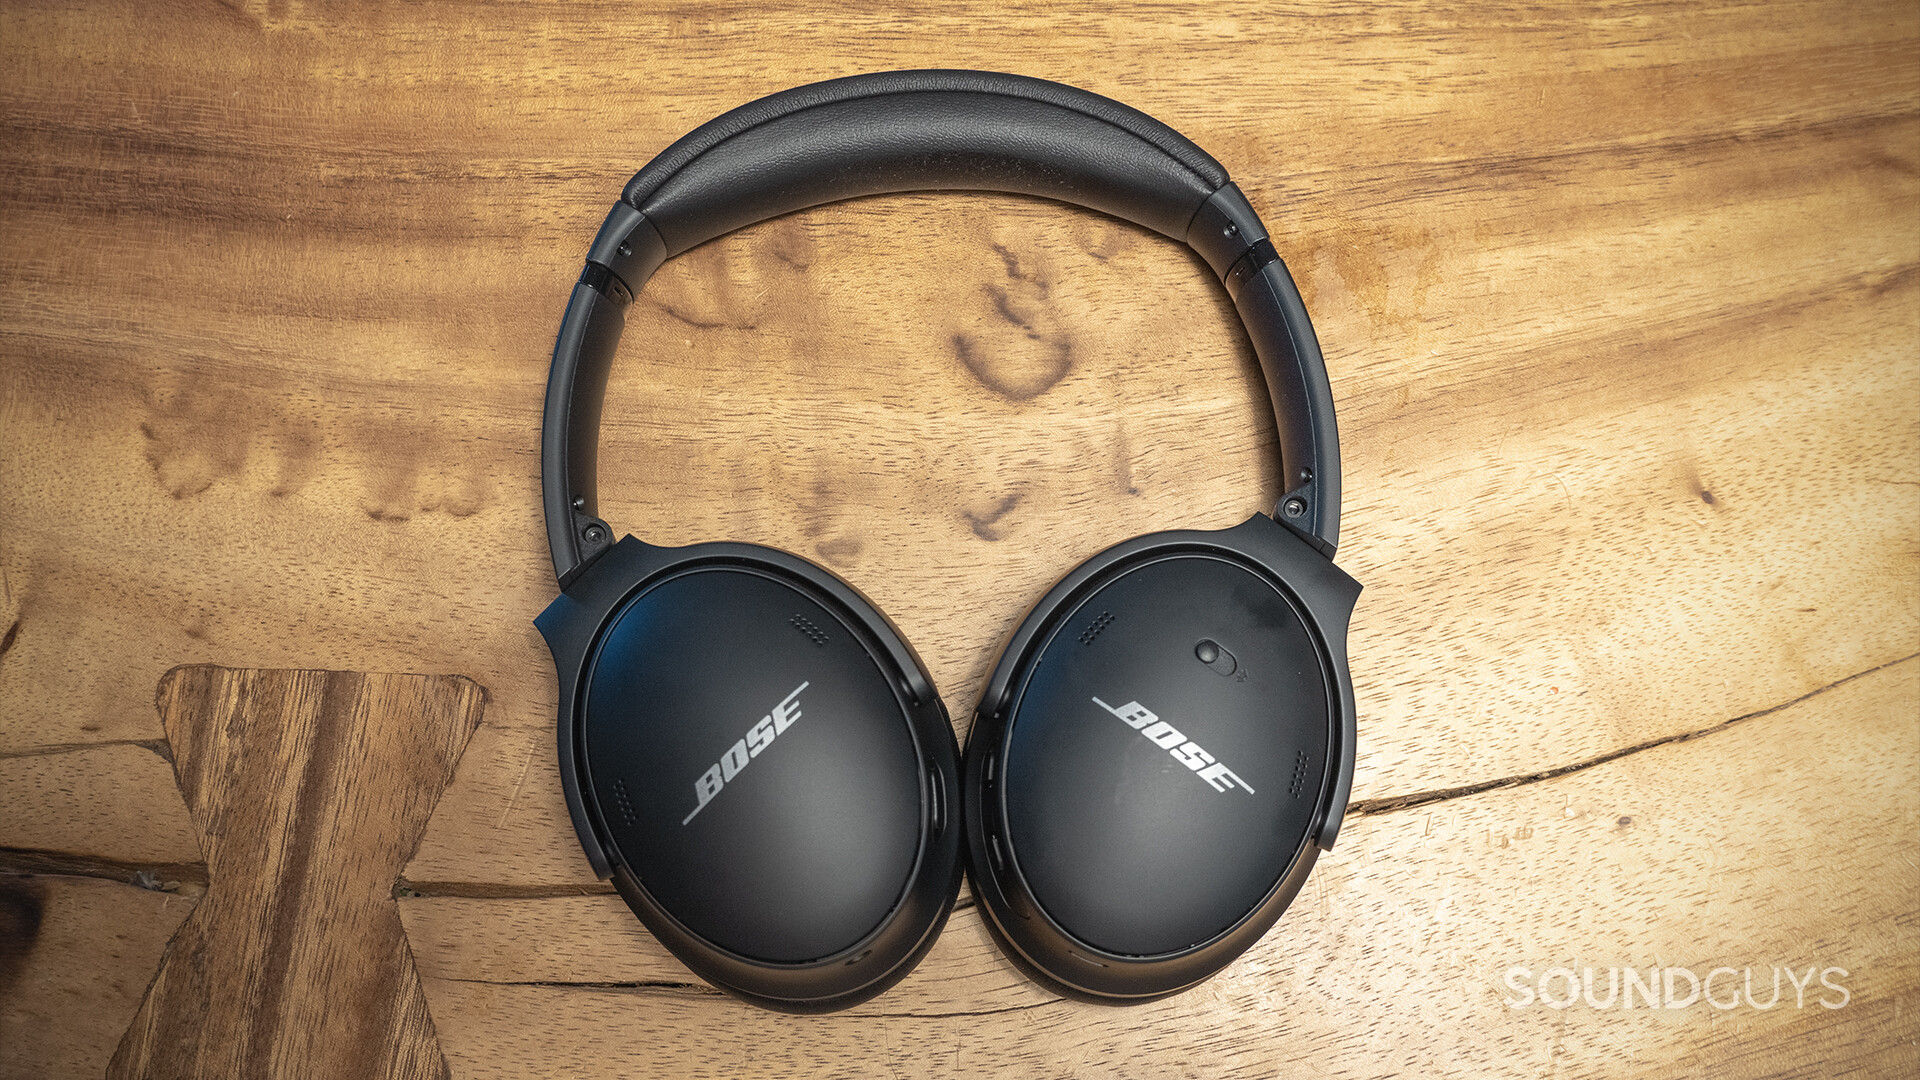 The Bose QuietComfort 45 noise canceling wireless headphones in black against a wooden surface.